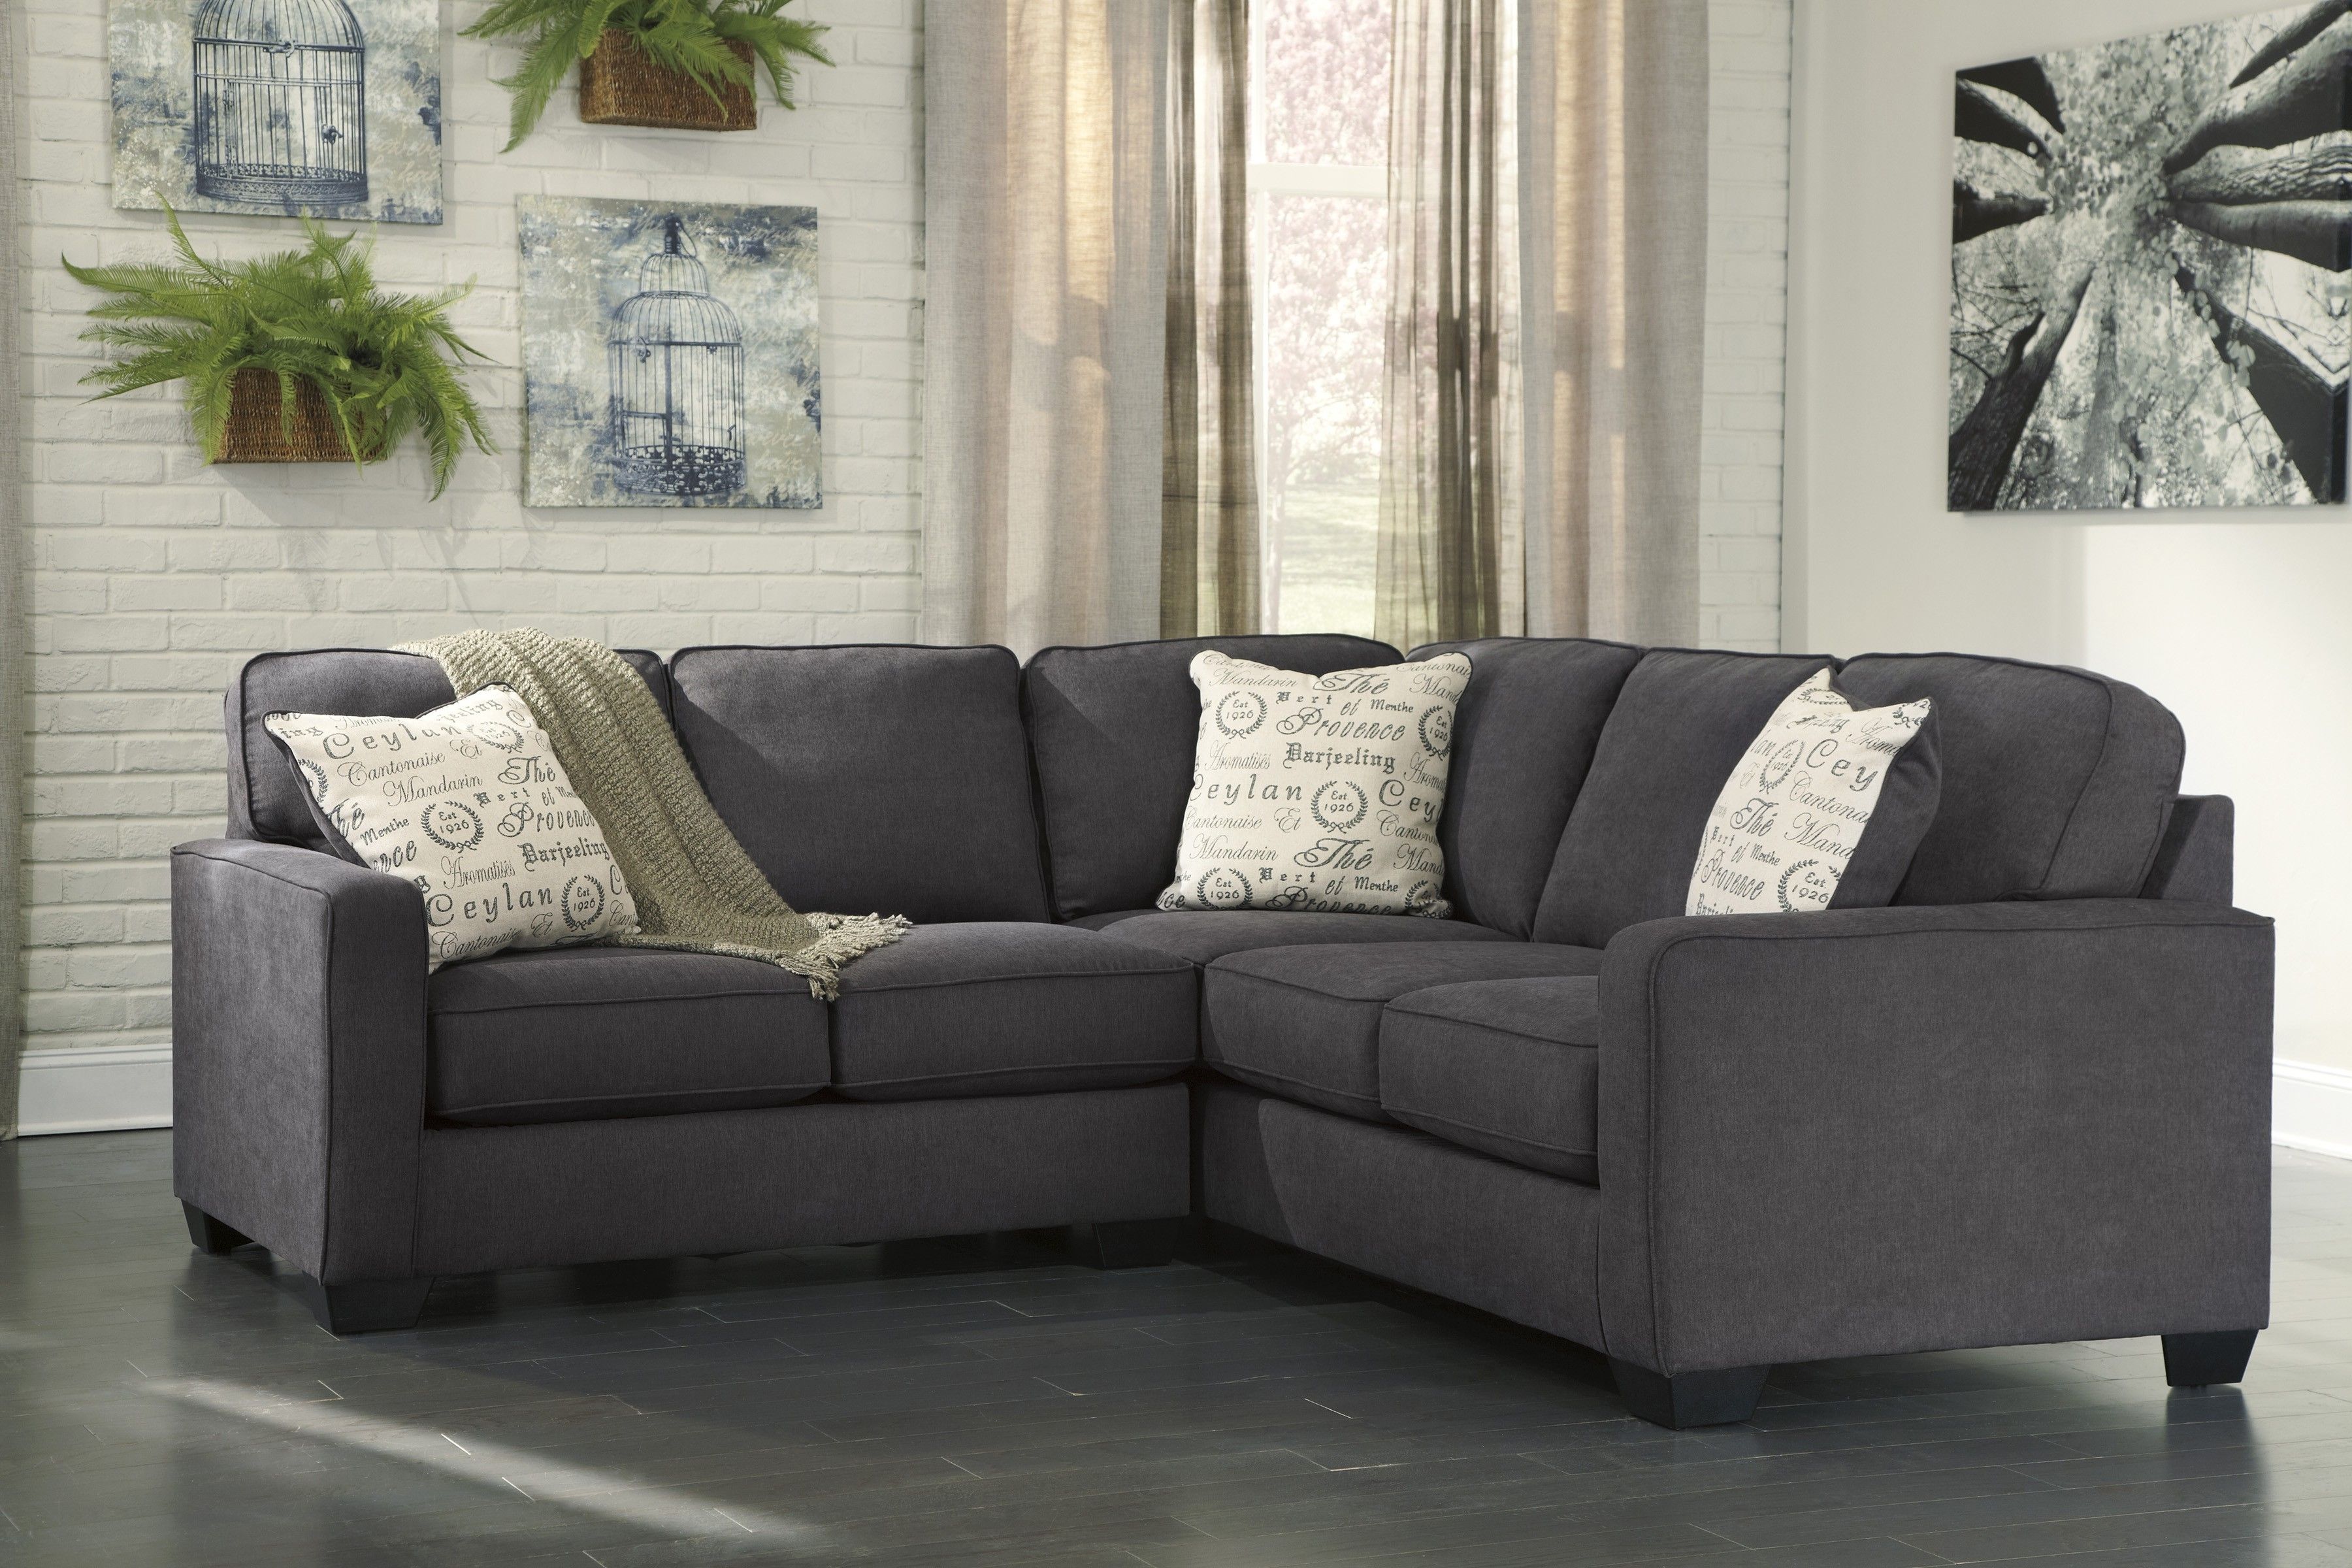 Elk Grove Ca Sectional Sofas For Latest Alenya Charcoal 2 Piece Sectional Sofa For $625.00 – Furnitureusa (Photo 1 of 15)